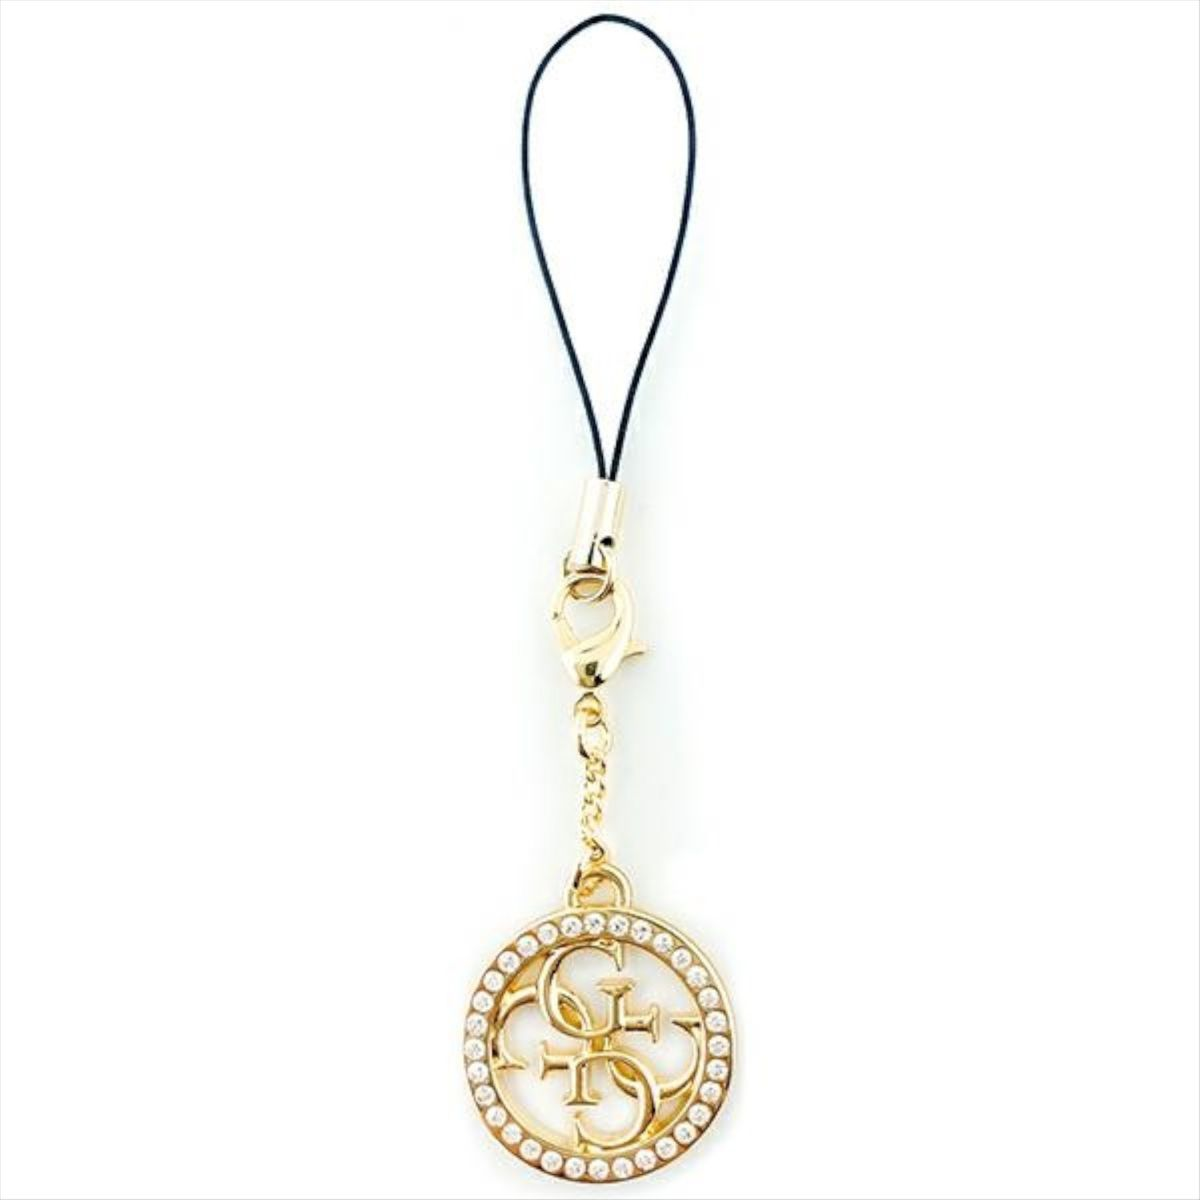 Guess Universell, Anhänger, Universell, Gold Rhinestone GUESS Phone Charm 4G Strap Umhängetasche,